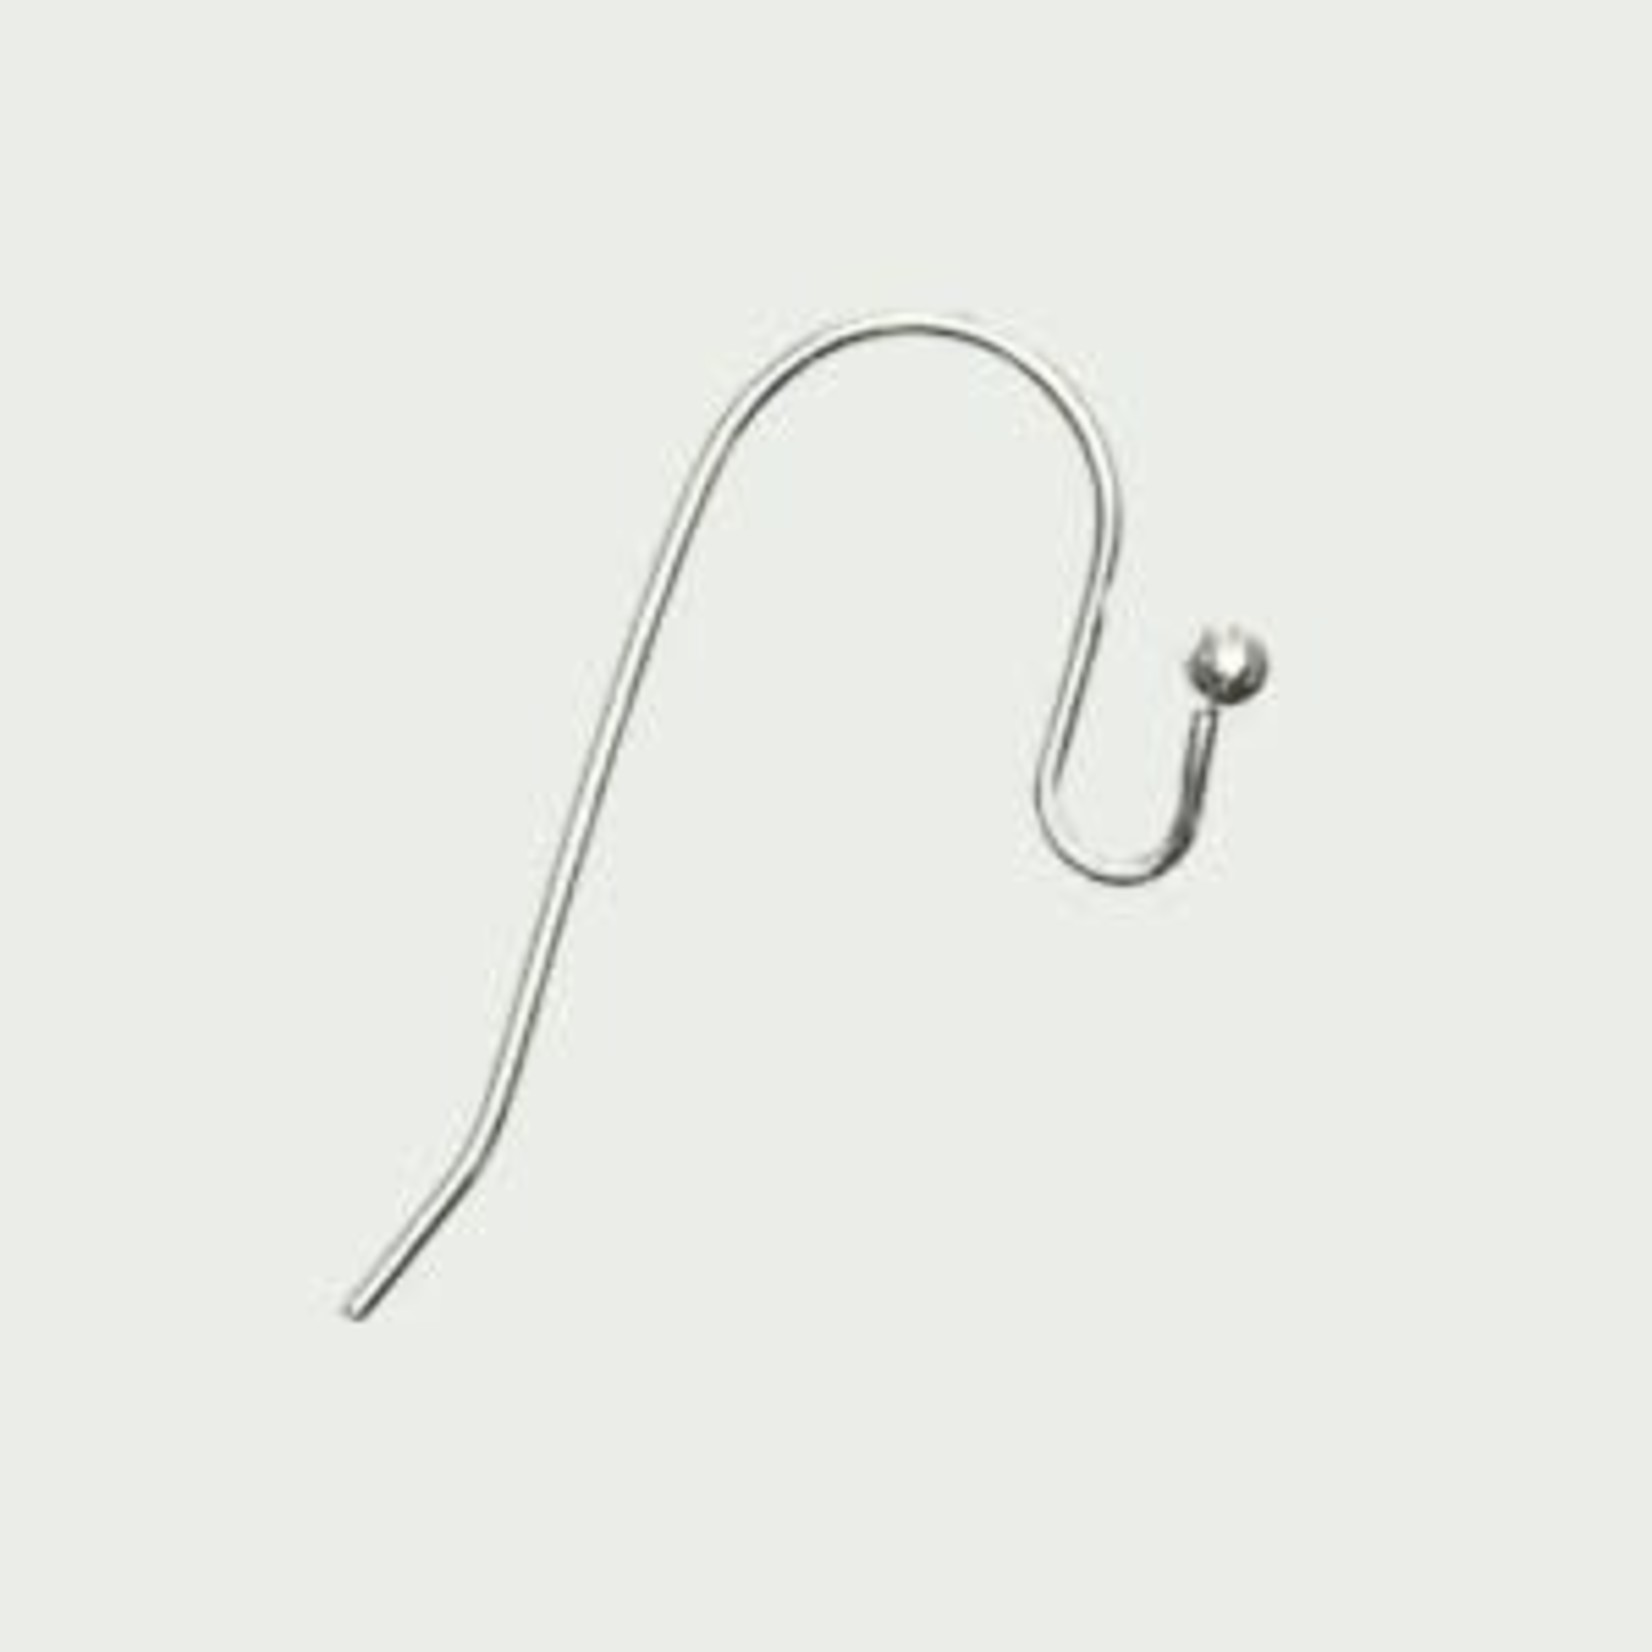 Silver Plated French Earwire Nickel-Free - 100 pieces